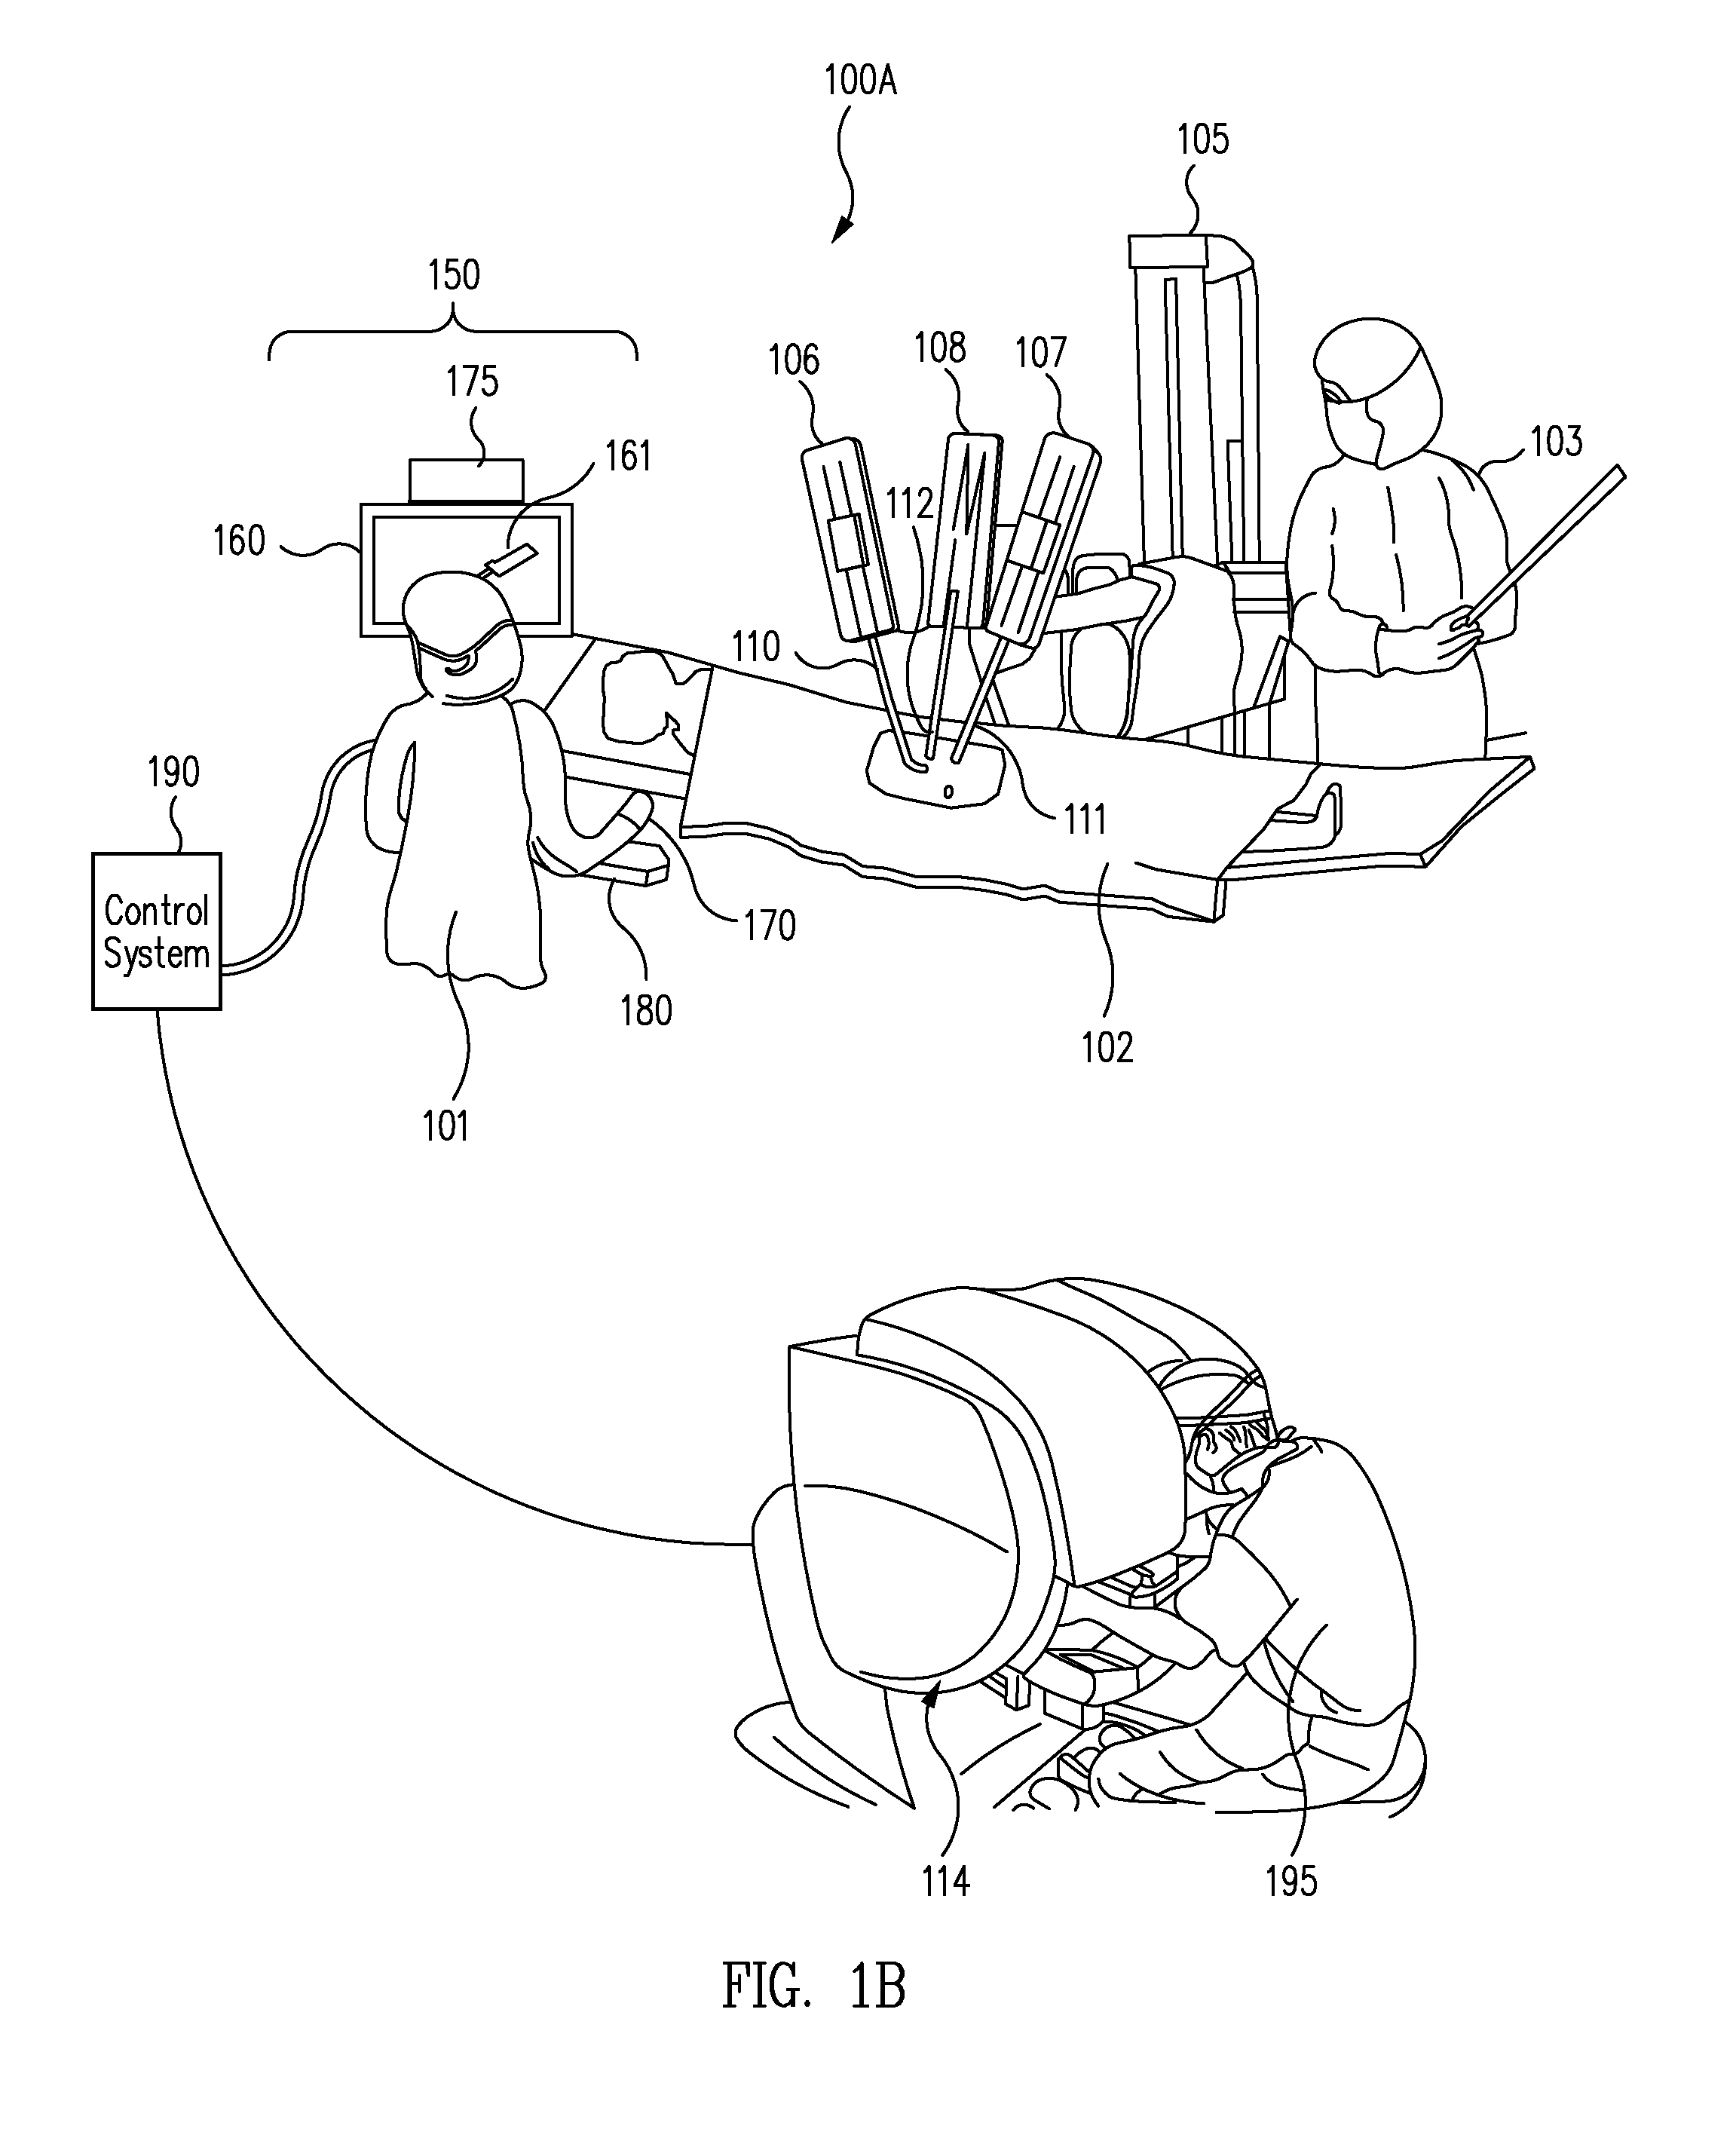 Patient-side surgeon interface for a minimally invasive, teleoperated surgical instrument